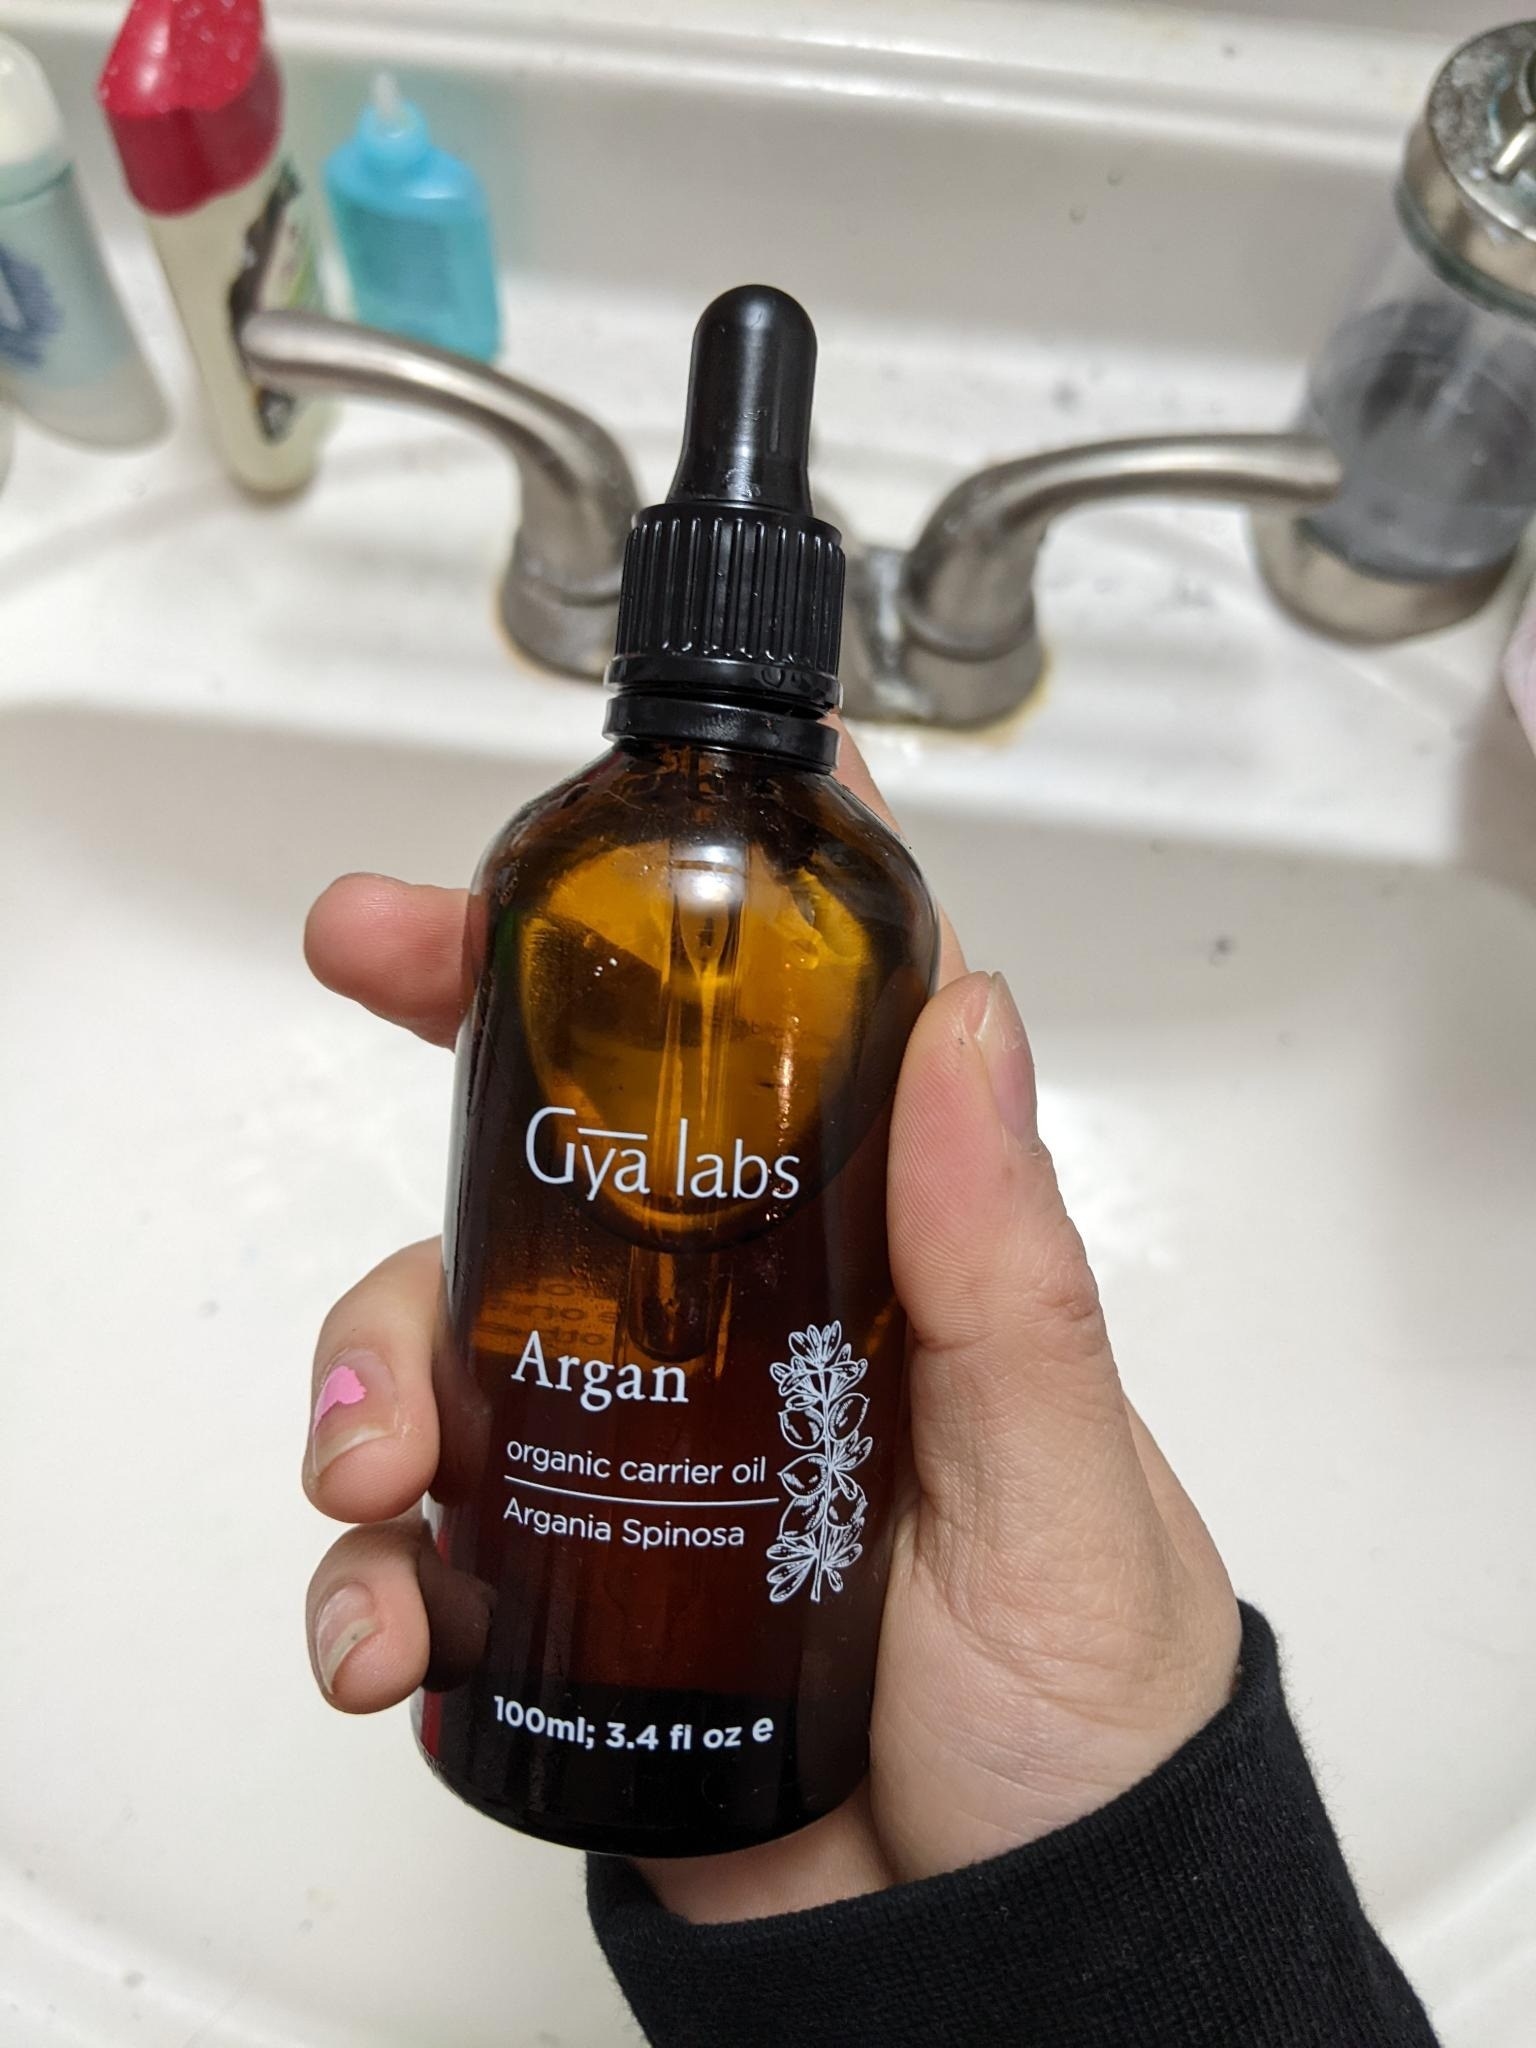 Someone holding a bottle of Gya labs argan oil